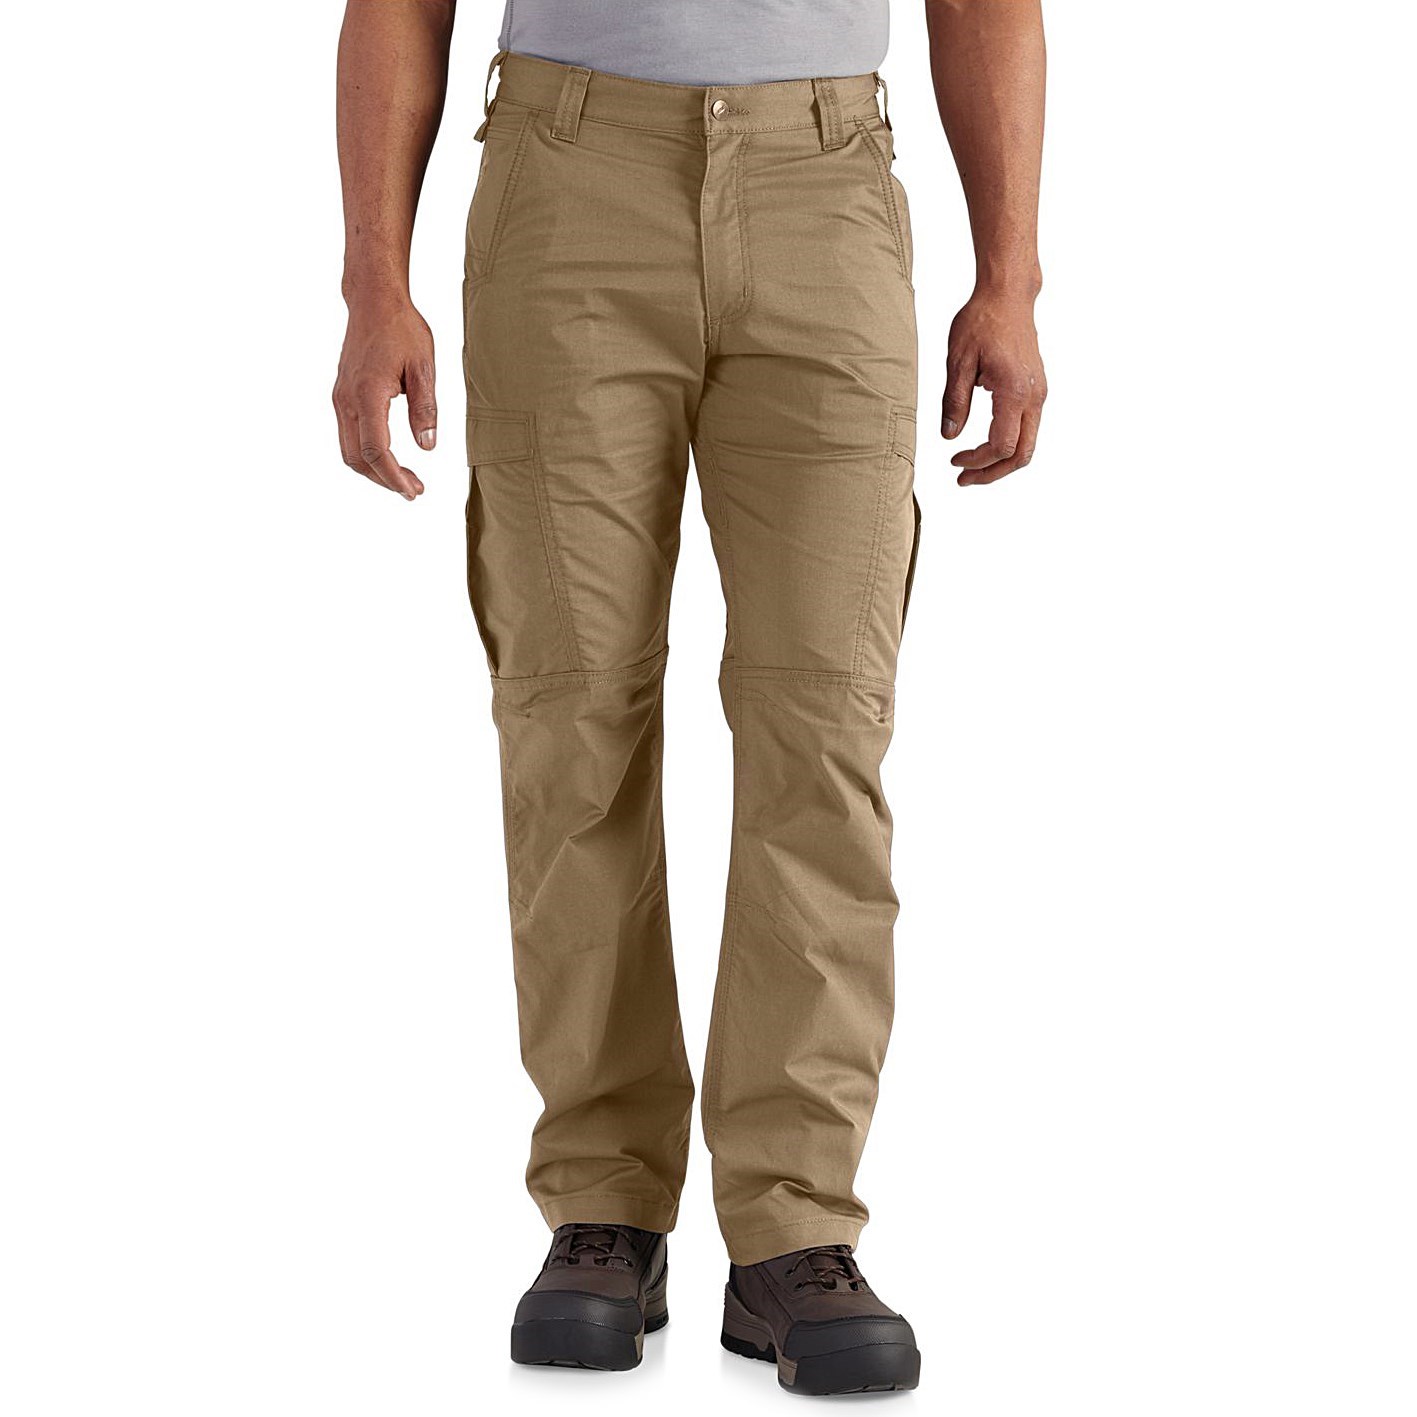 Carhartt Force Extremes Cargo Pants (For Men)